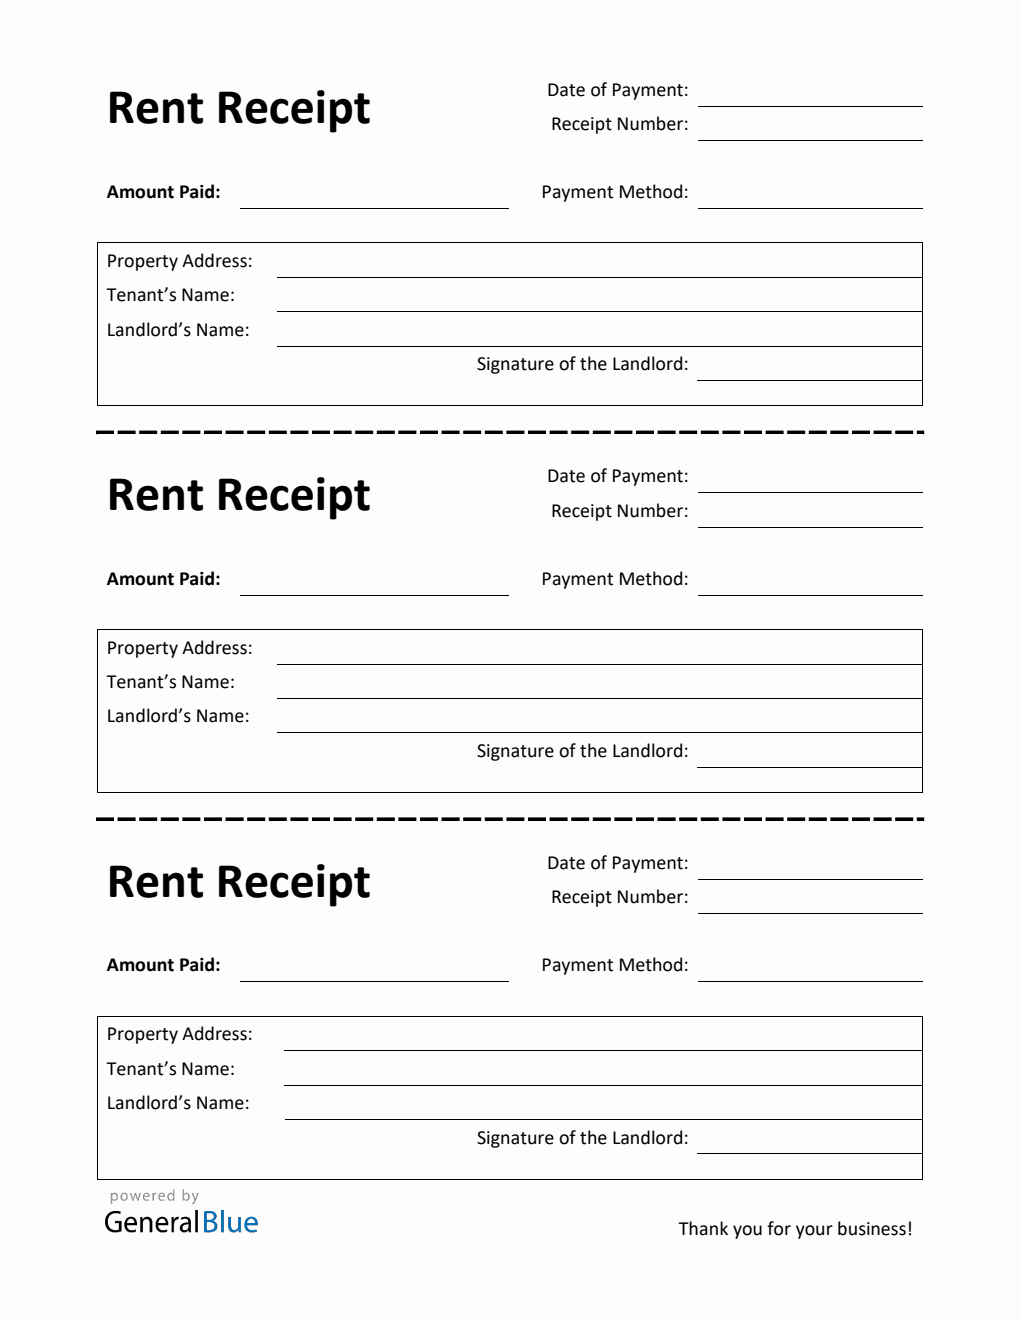 Printable Rent Receipt Template in PDF